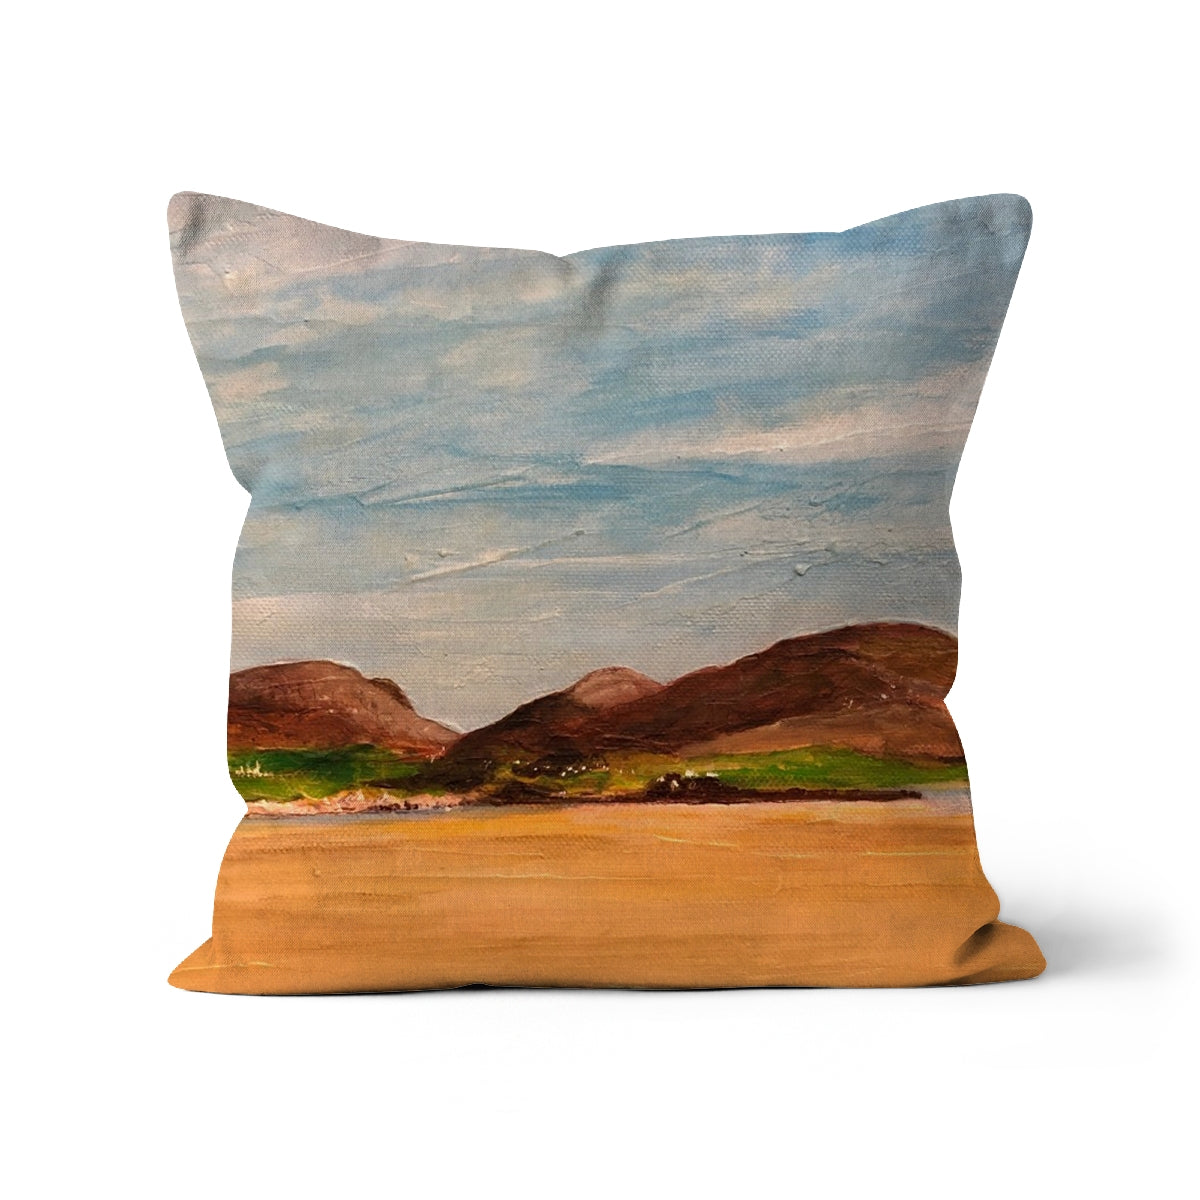 Uig Sands Lewis Art Gifts Cushion-Cushions-Hebridean Islands Art Gallery-Faux Suede-22"x22"-Paintings, Prints, Homeware, Art Gifts From Scotland By Scottish Artist Kevin Hunter